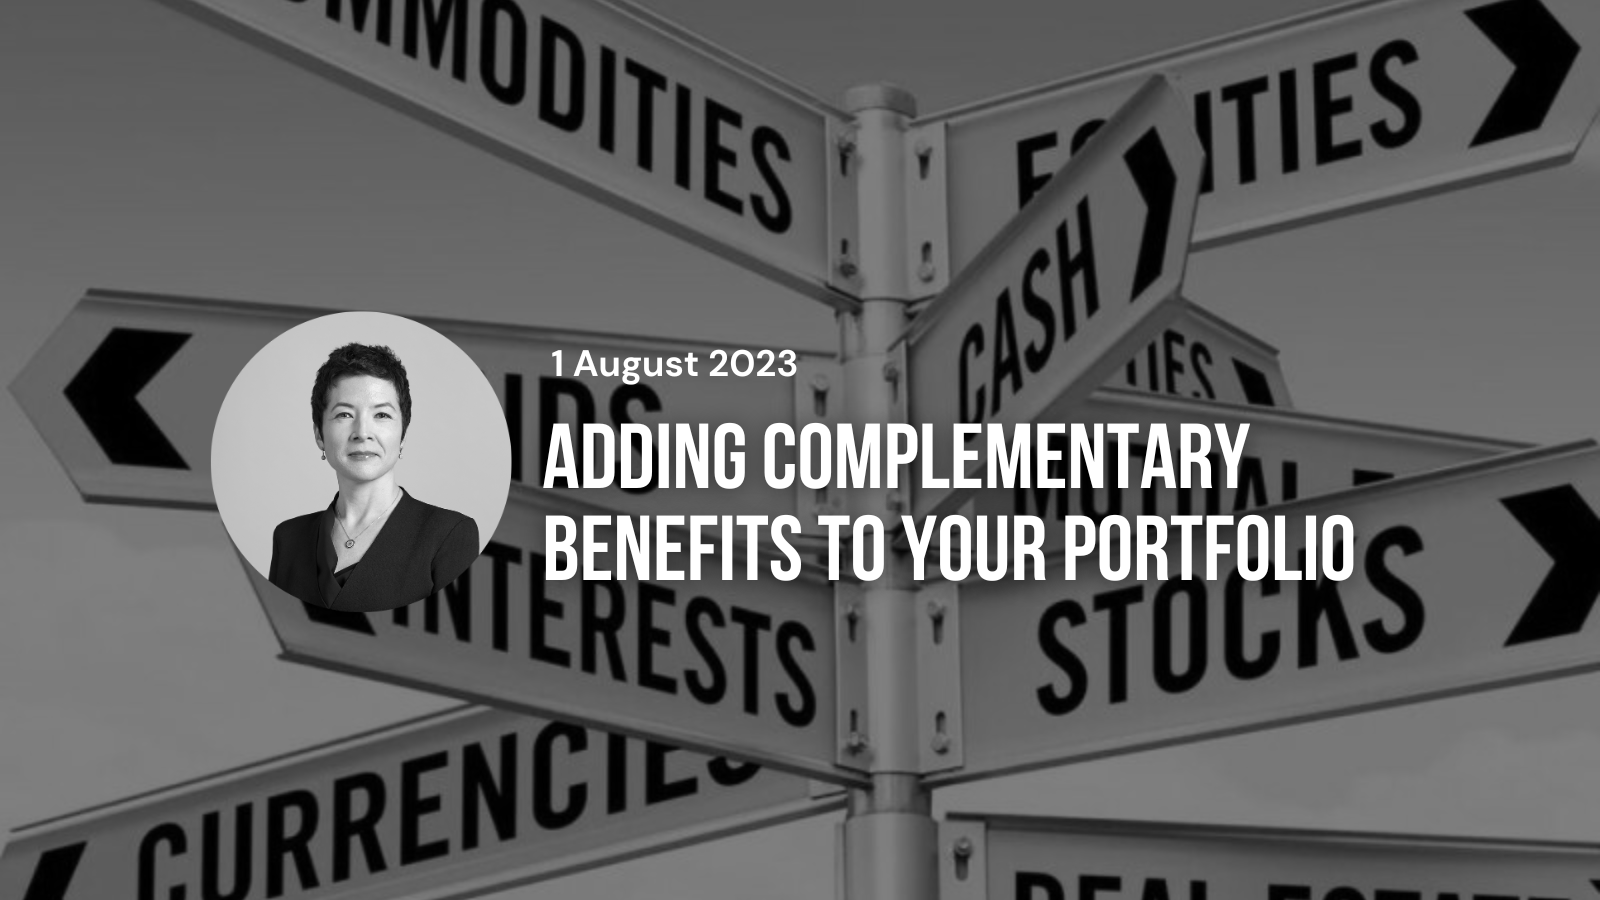 Adding complementary benefits to your portfolio